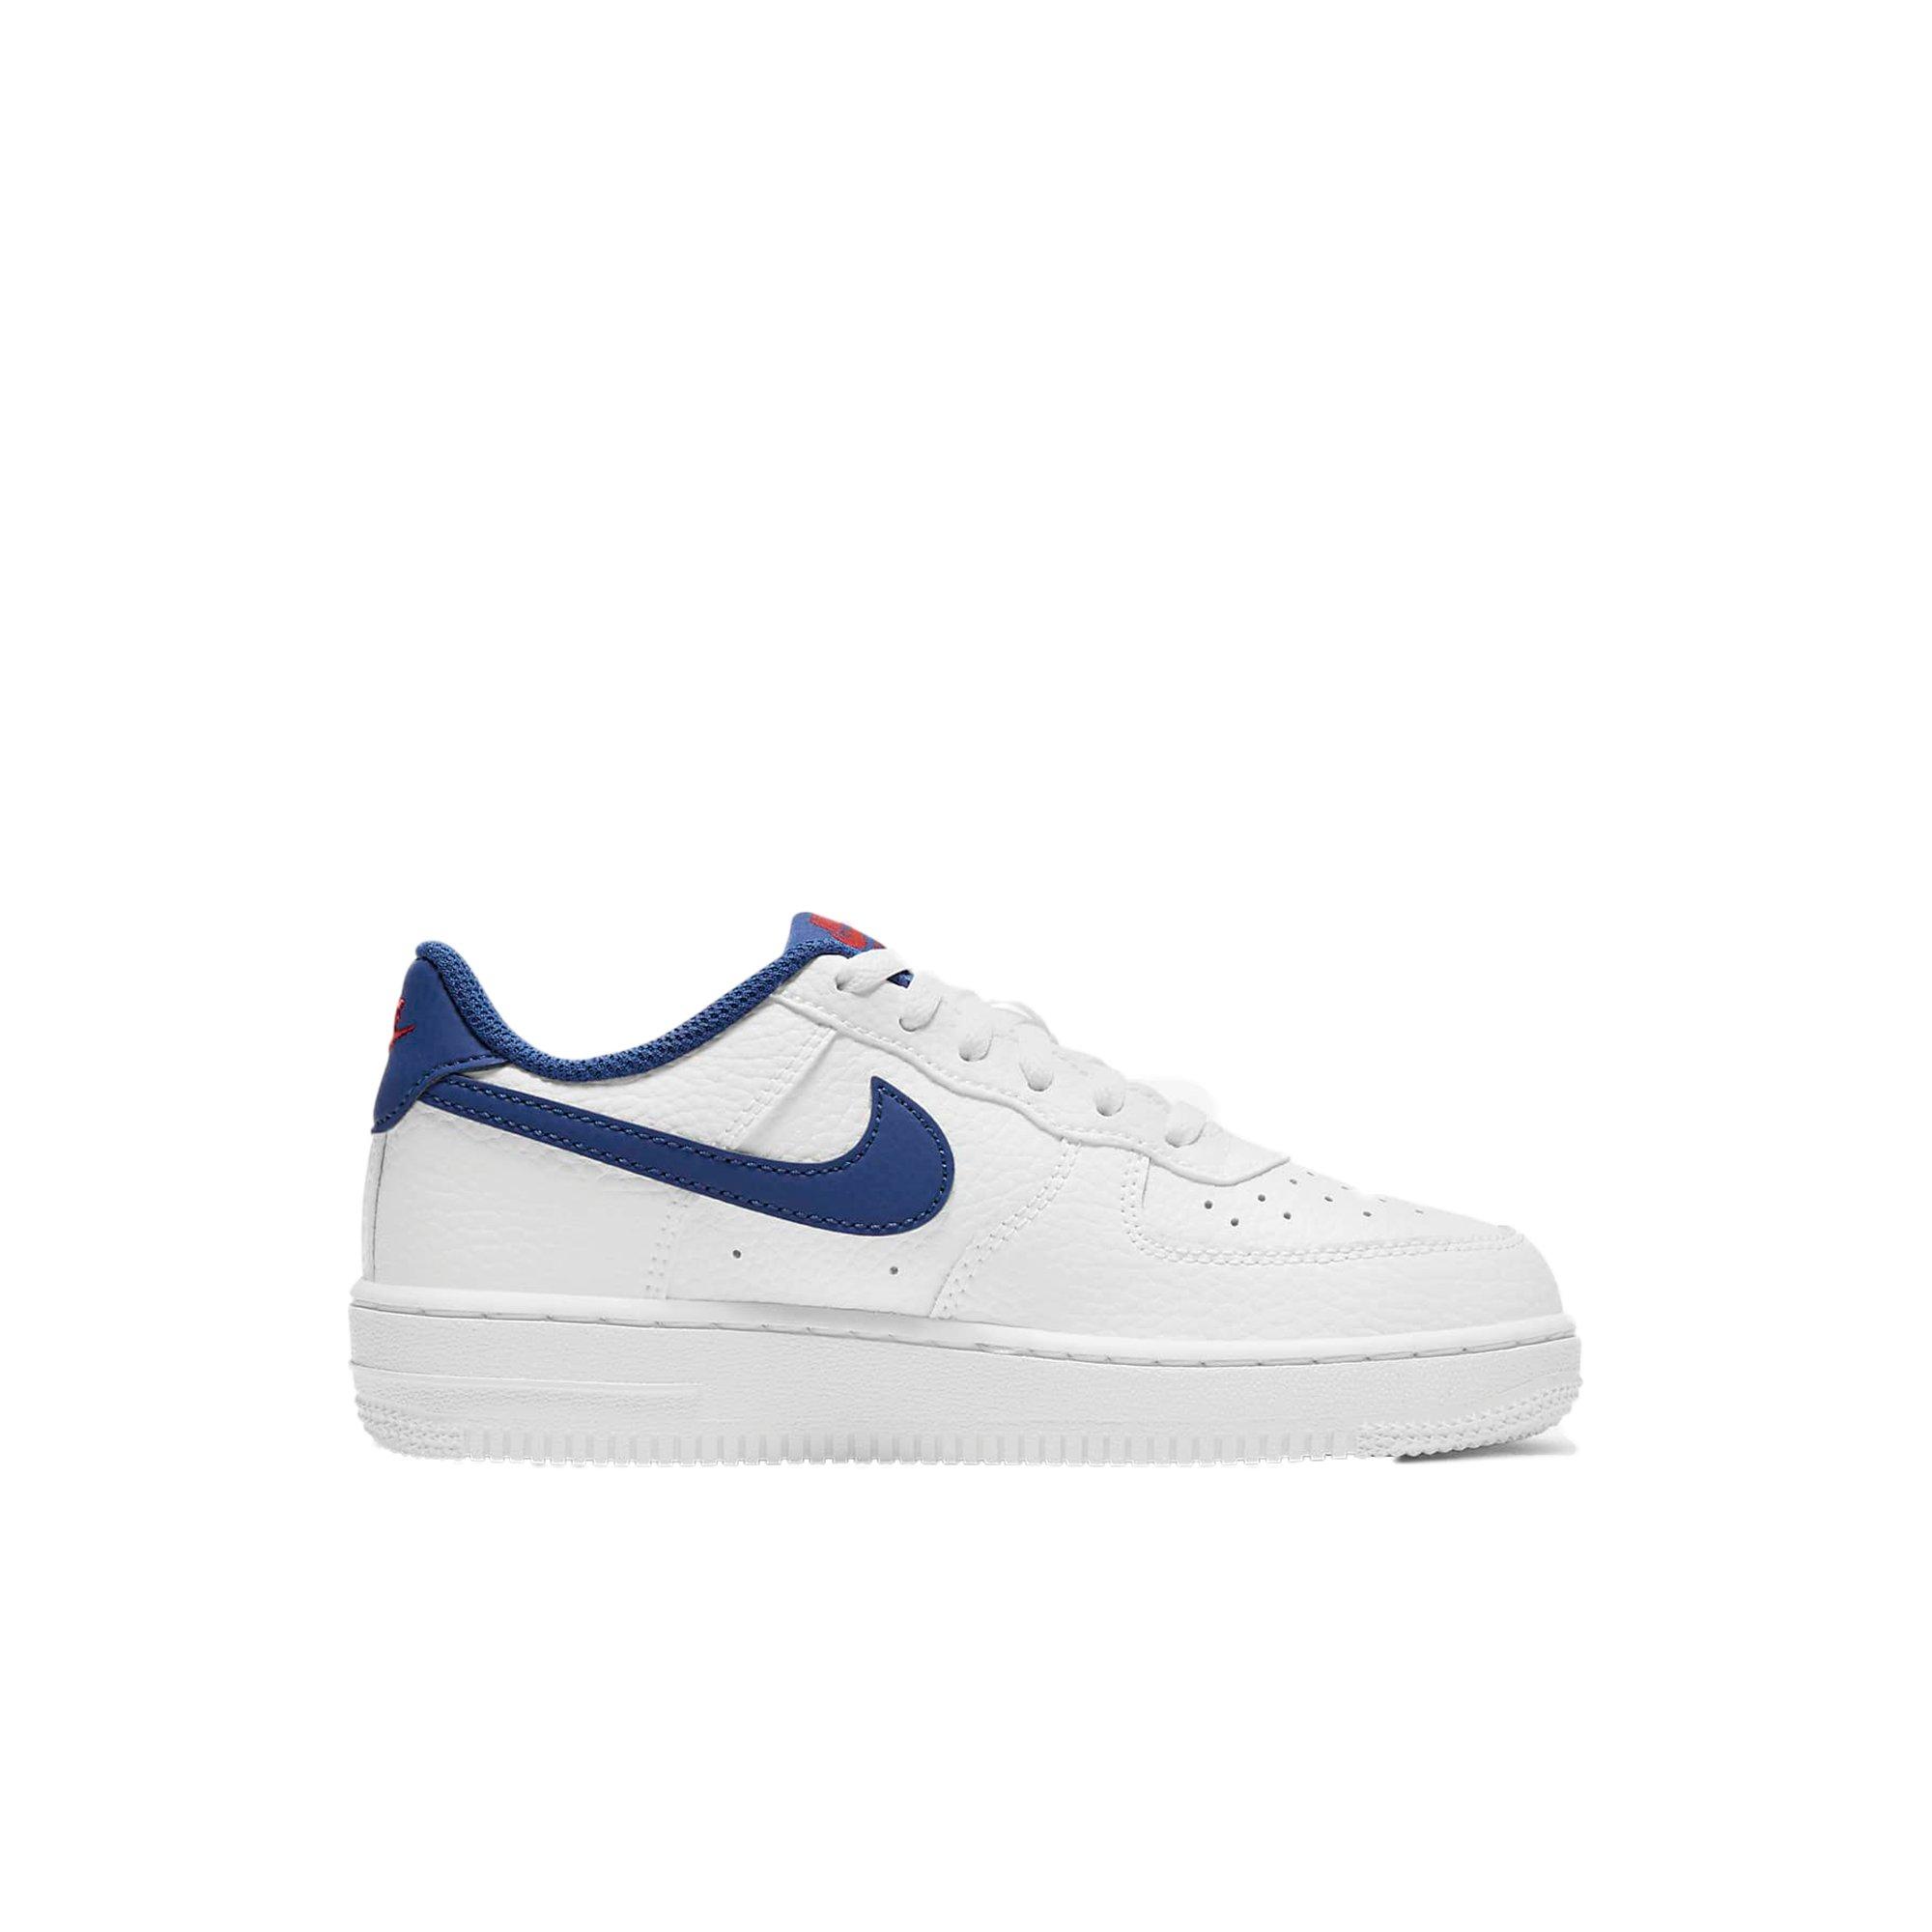 Red Nike Air Force 1 Shoes & Sneakers - Hibbett